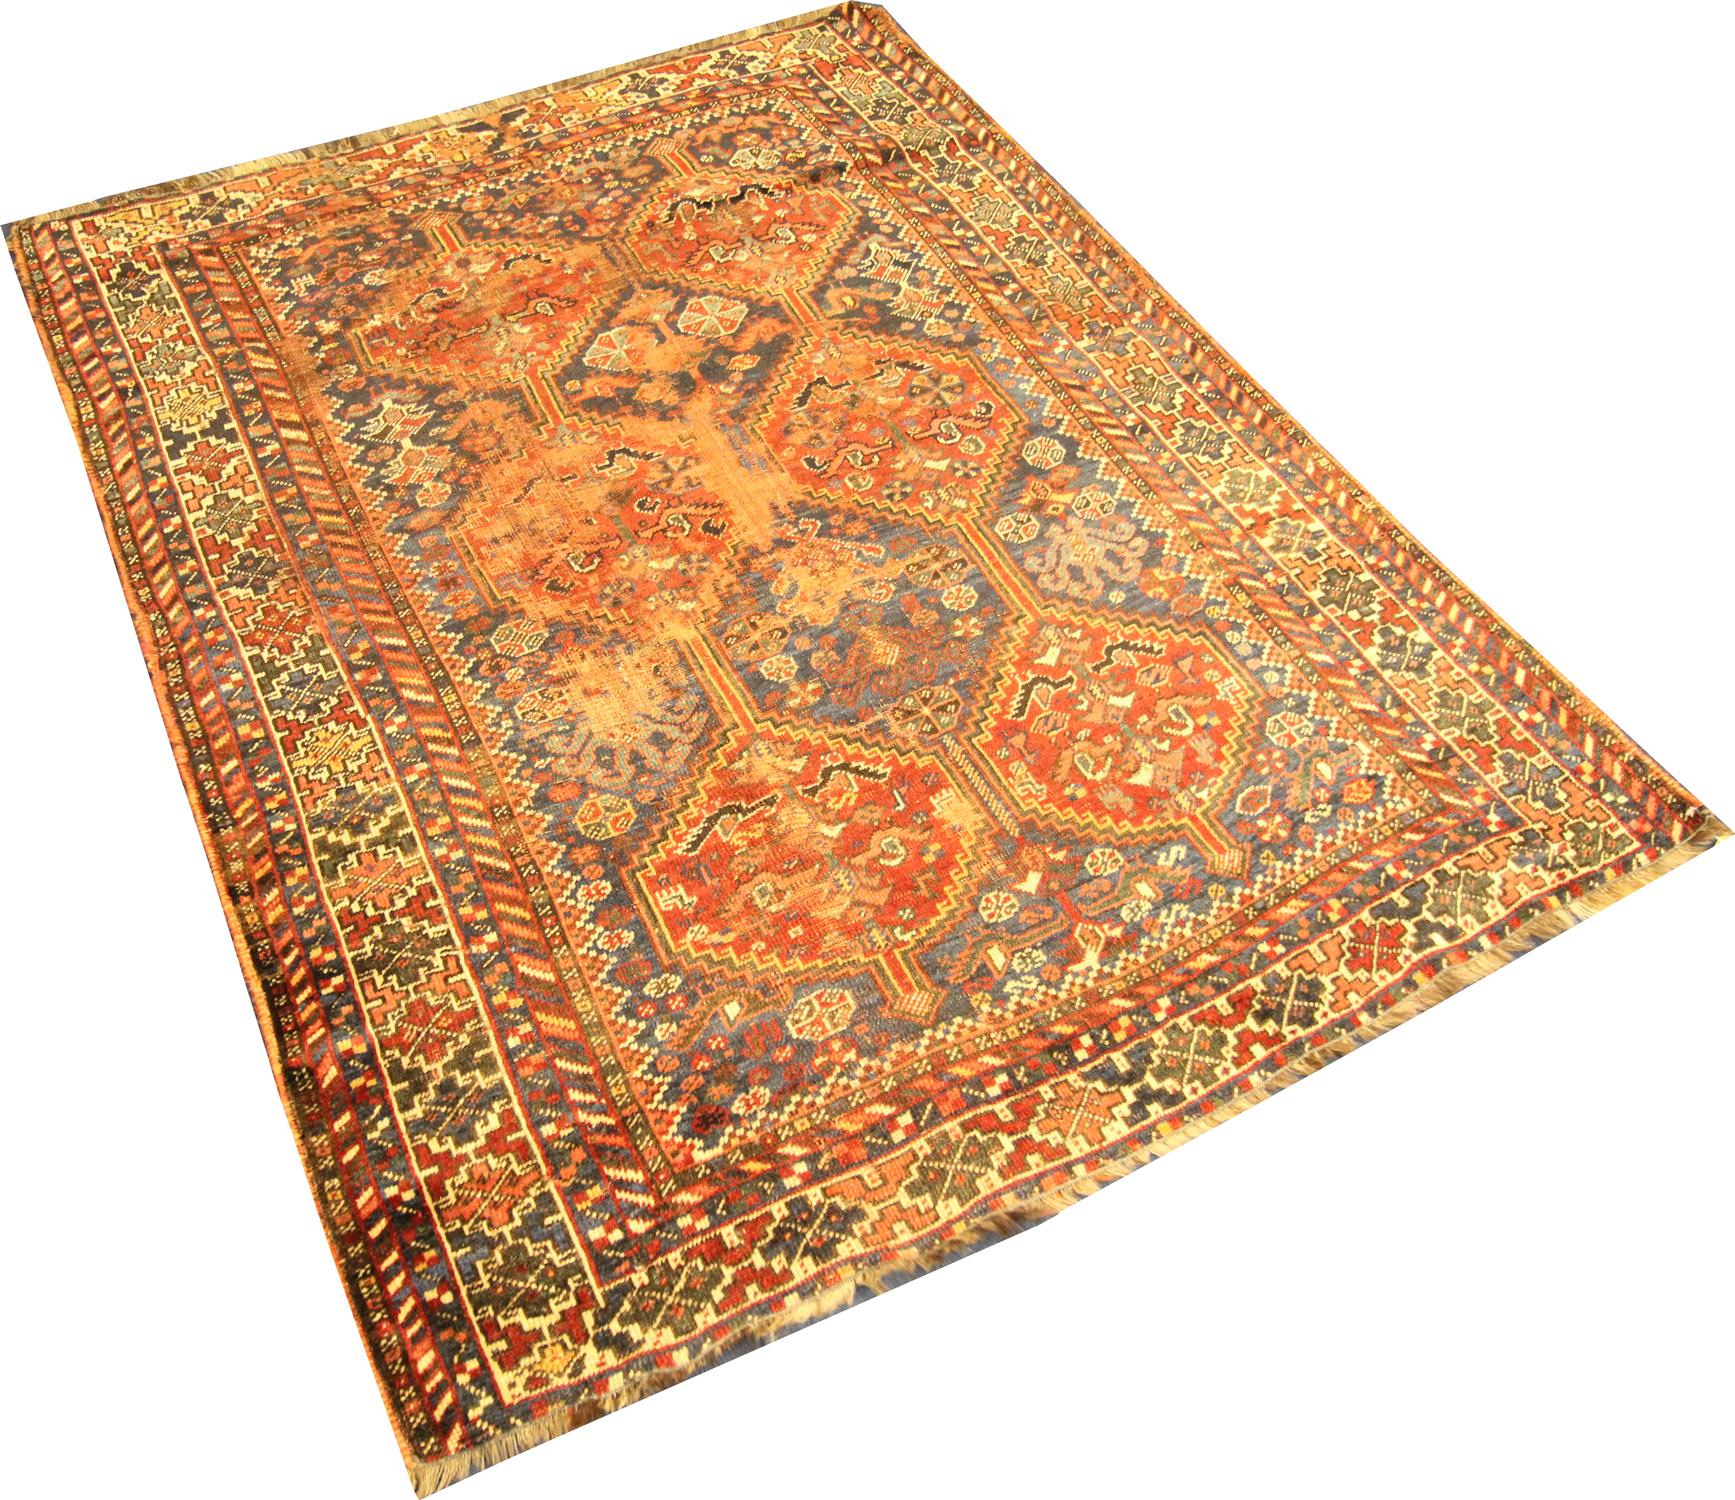 This fine wool rug was woven by hand in Azerbaijan, a country in the Caucasus region known for there bold designs. The central design features a tribal motif pattern woven in orange, beige and cream on a blue background. A layered geometric border